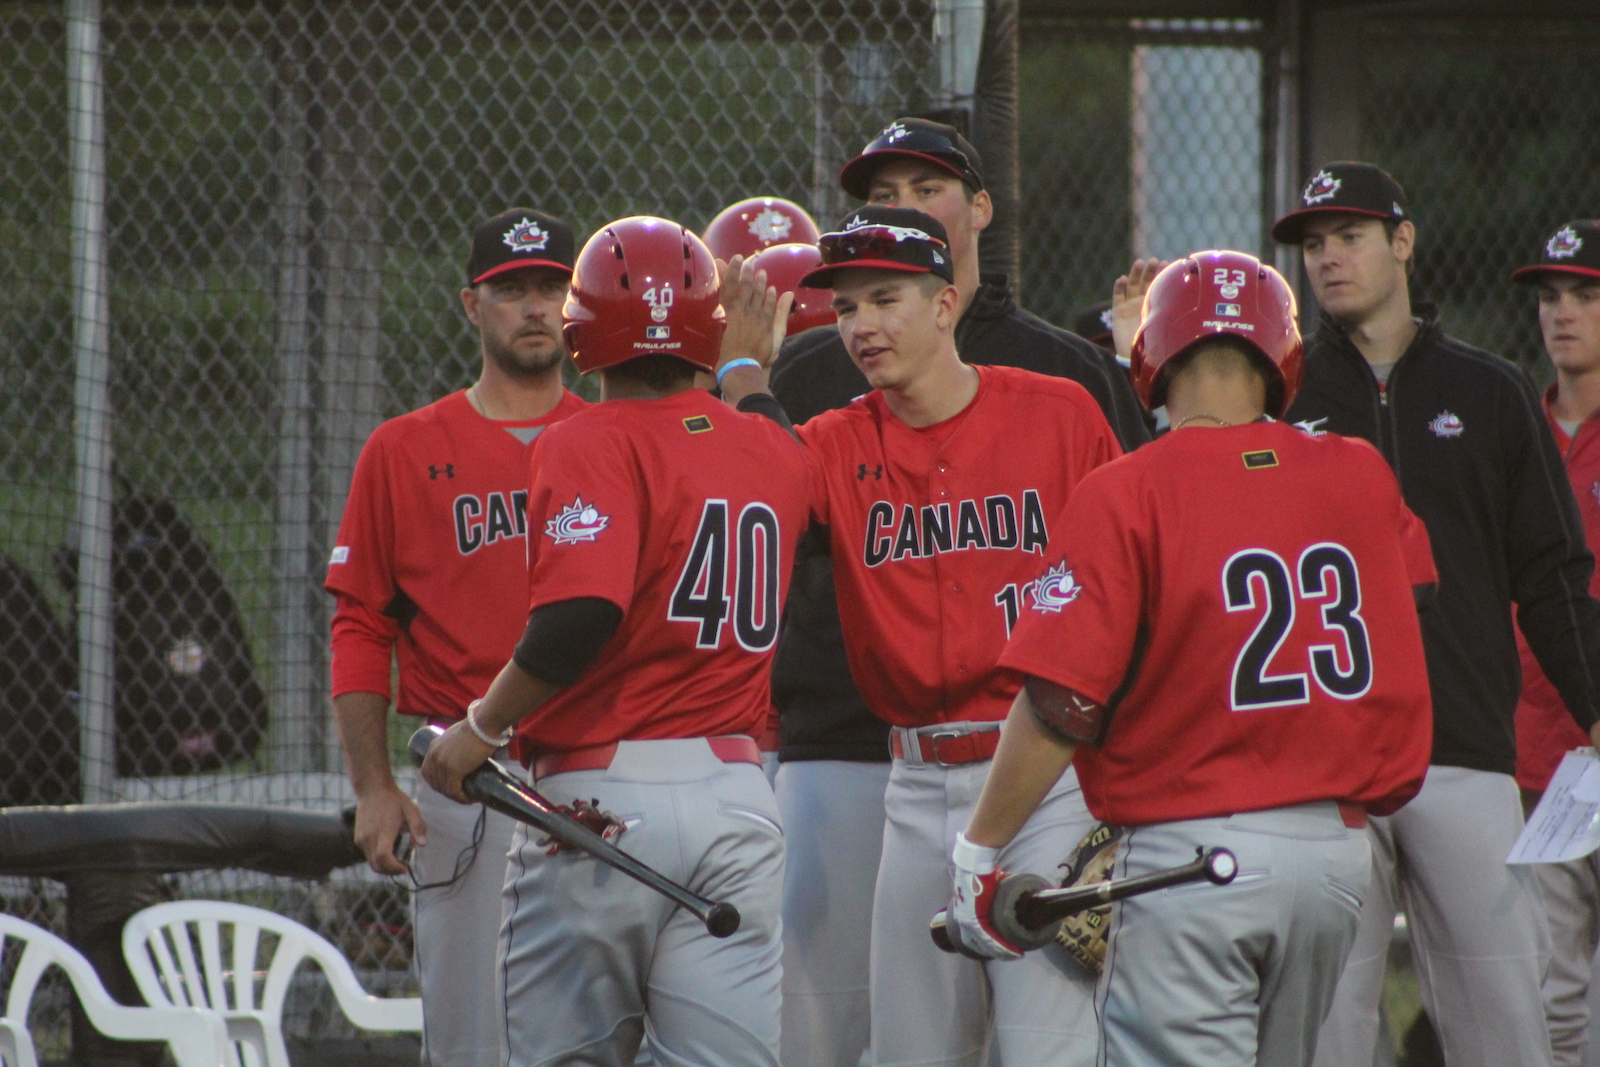 U-18 World Cup Selection Camp: Canada takes game two of series